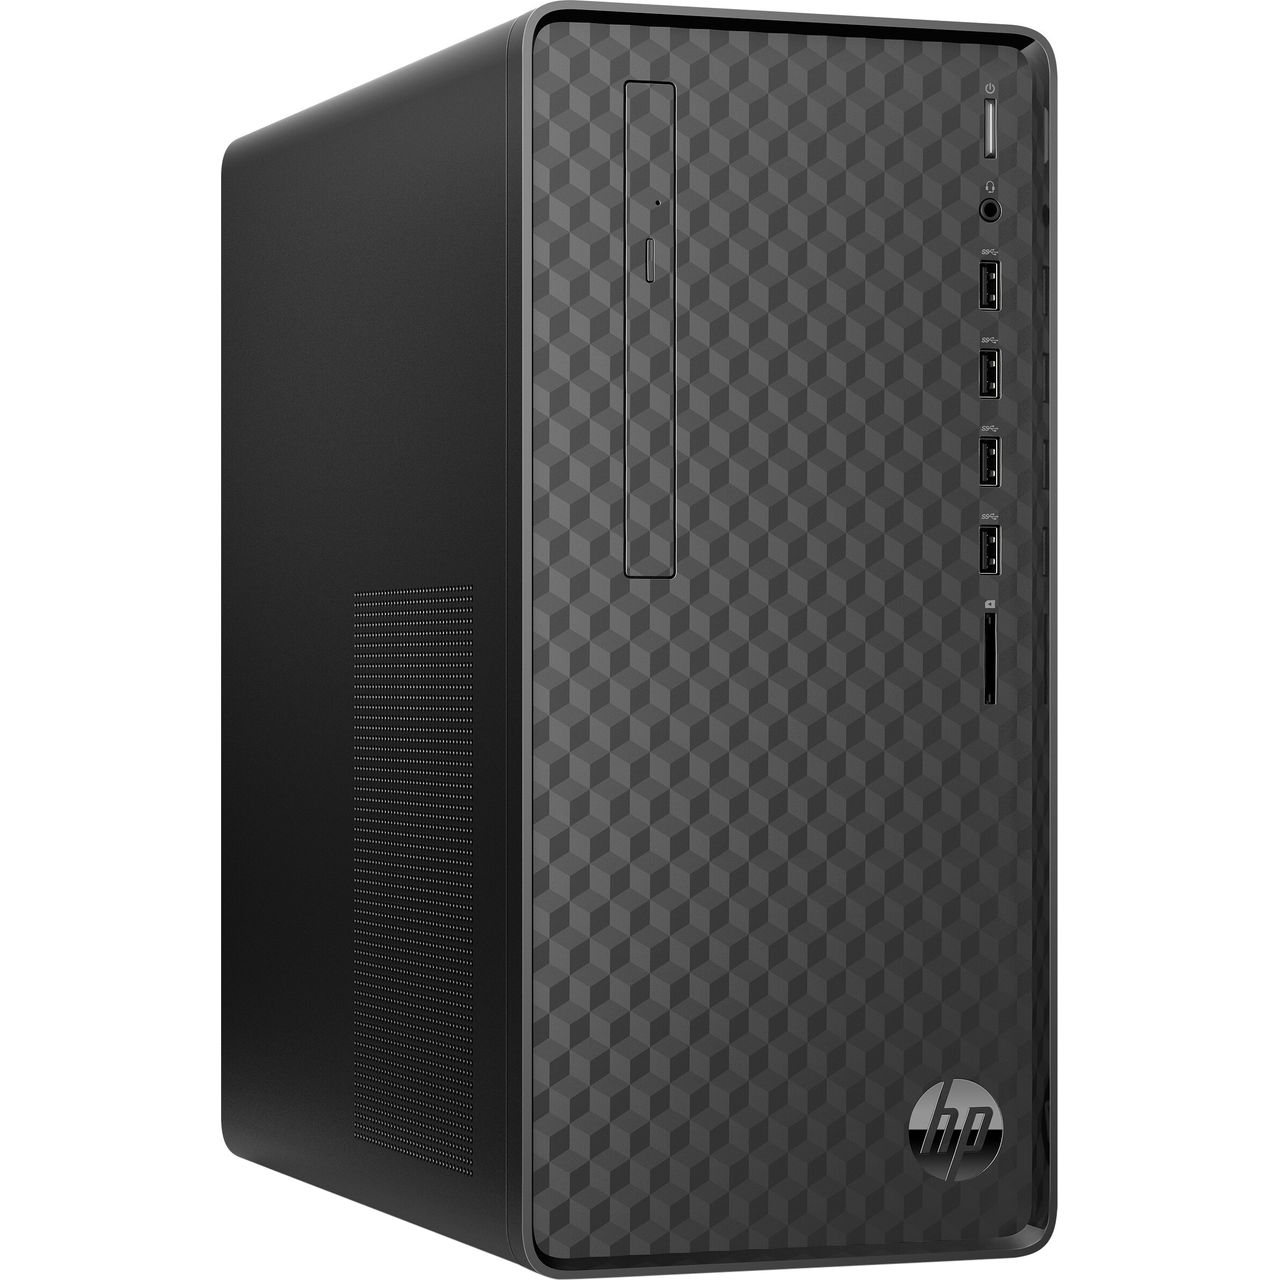 HP M01-F1006na Tower Review